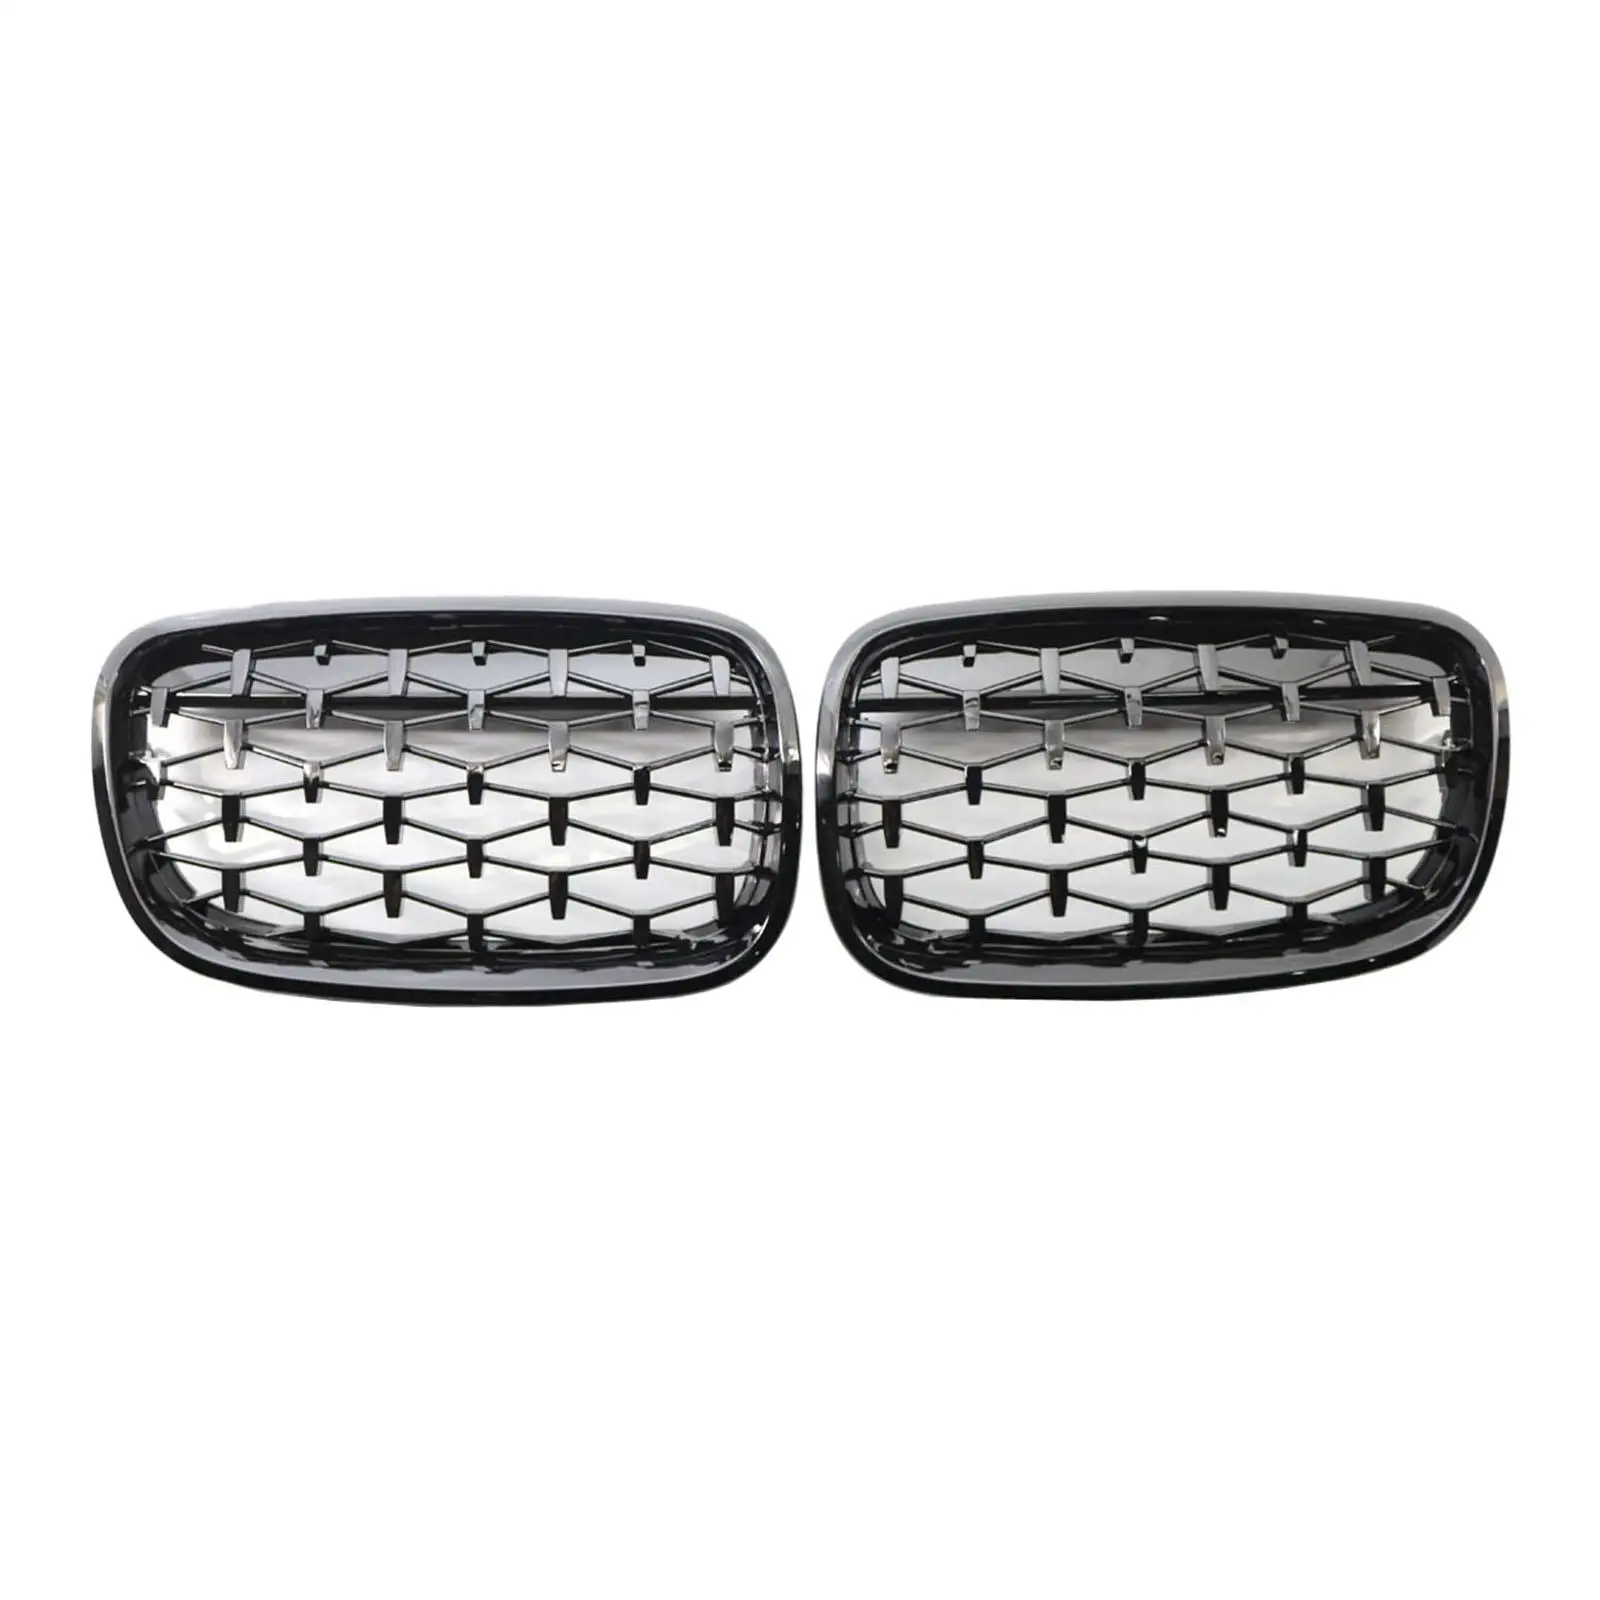 Front Bumper Grill Grille Replaces Diamond Star Shaped Fit for BMW x5 E70 08-13 High Performance Durable Premium Spare Parts